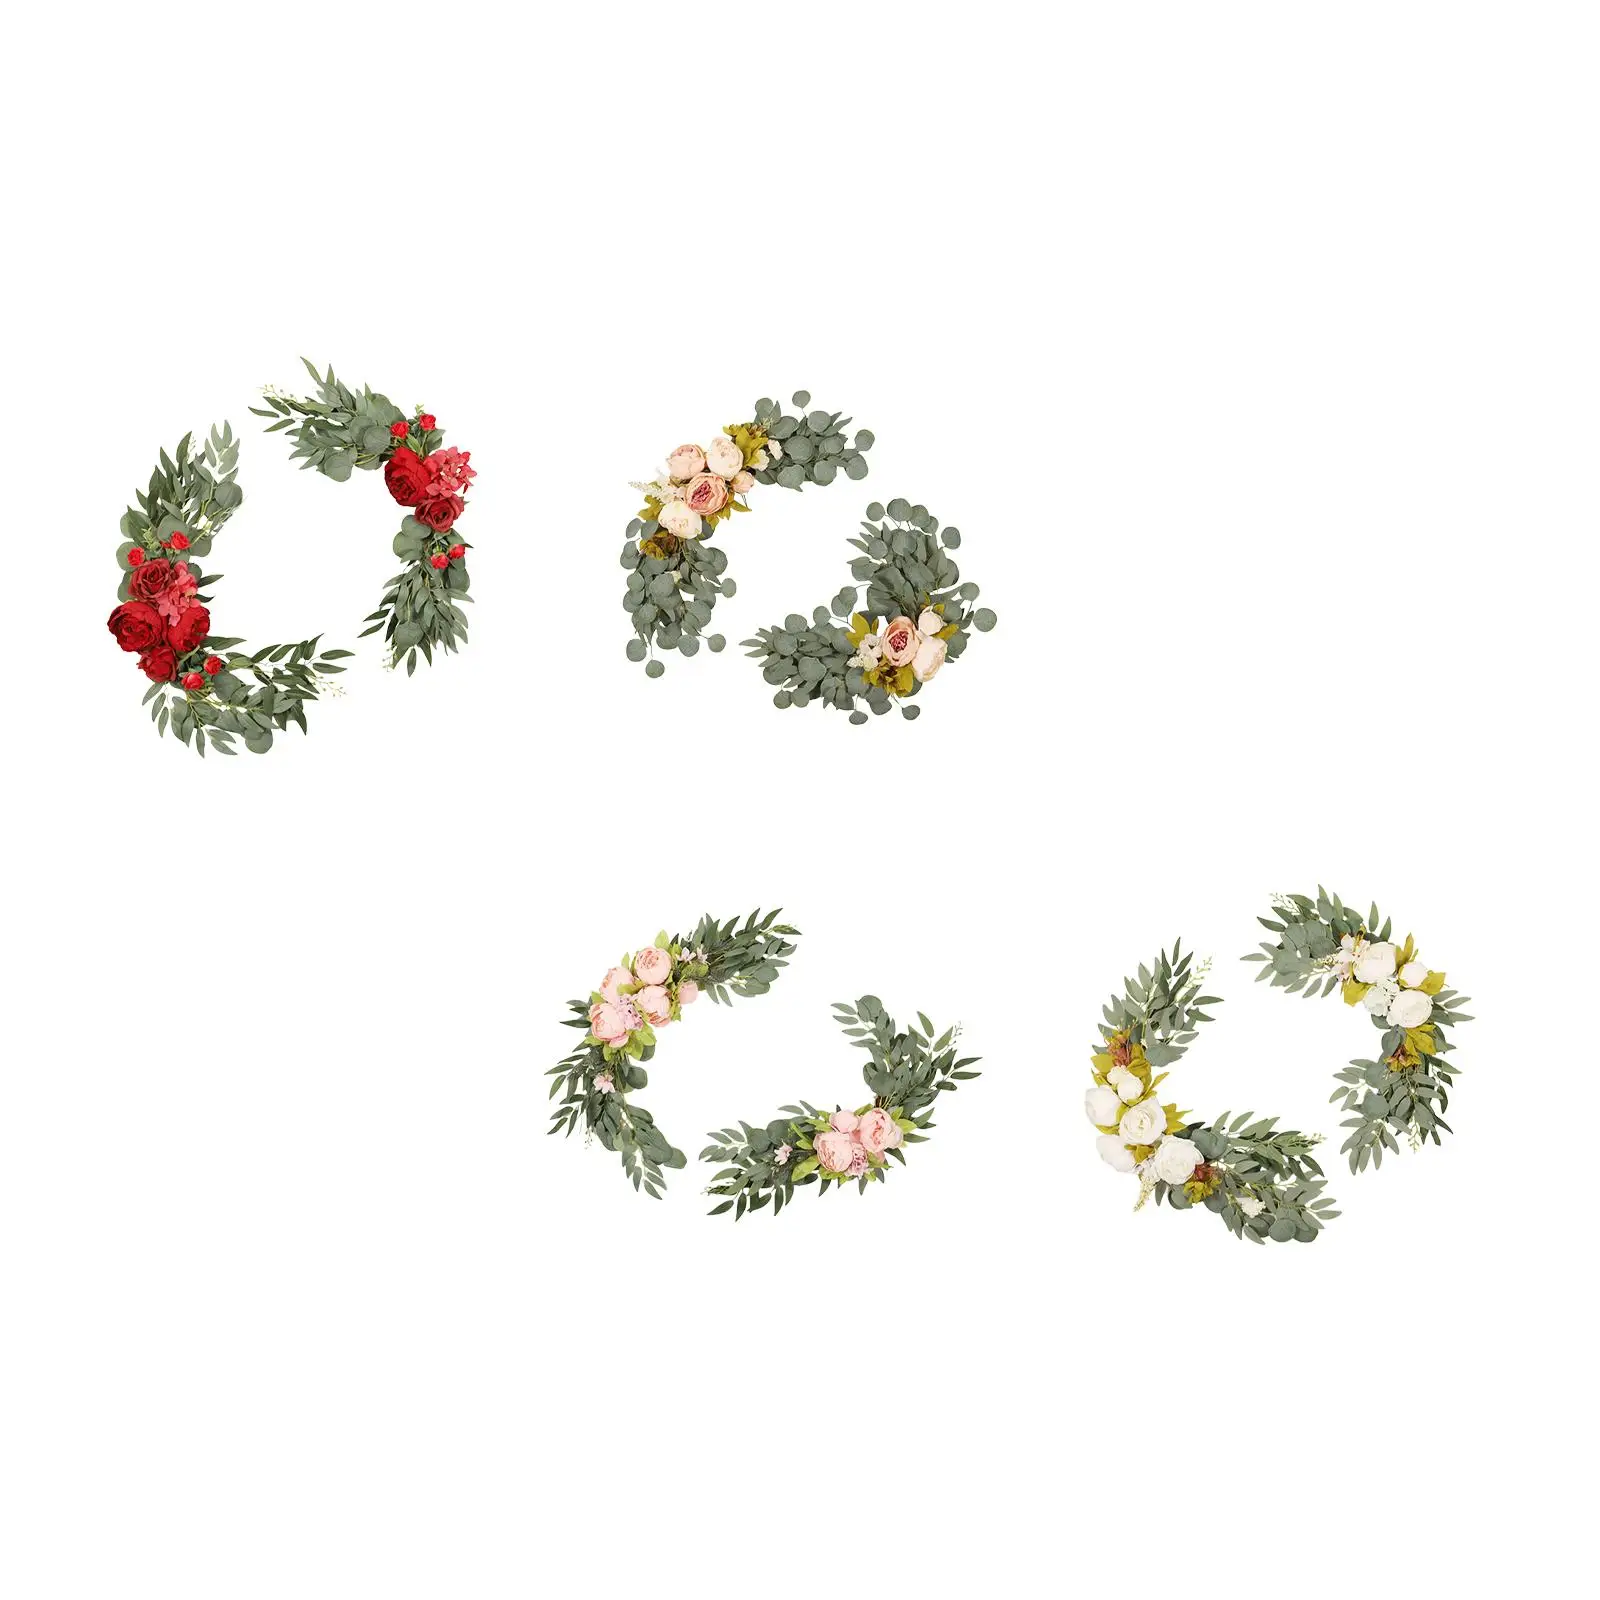 2Pcs Wedding Arch Flowers Handmade Hanging Wreath Flowers Backdrop Garlands Floral for Ceremony Craft Art Arch Front Door Wall